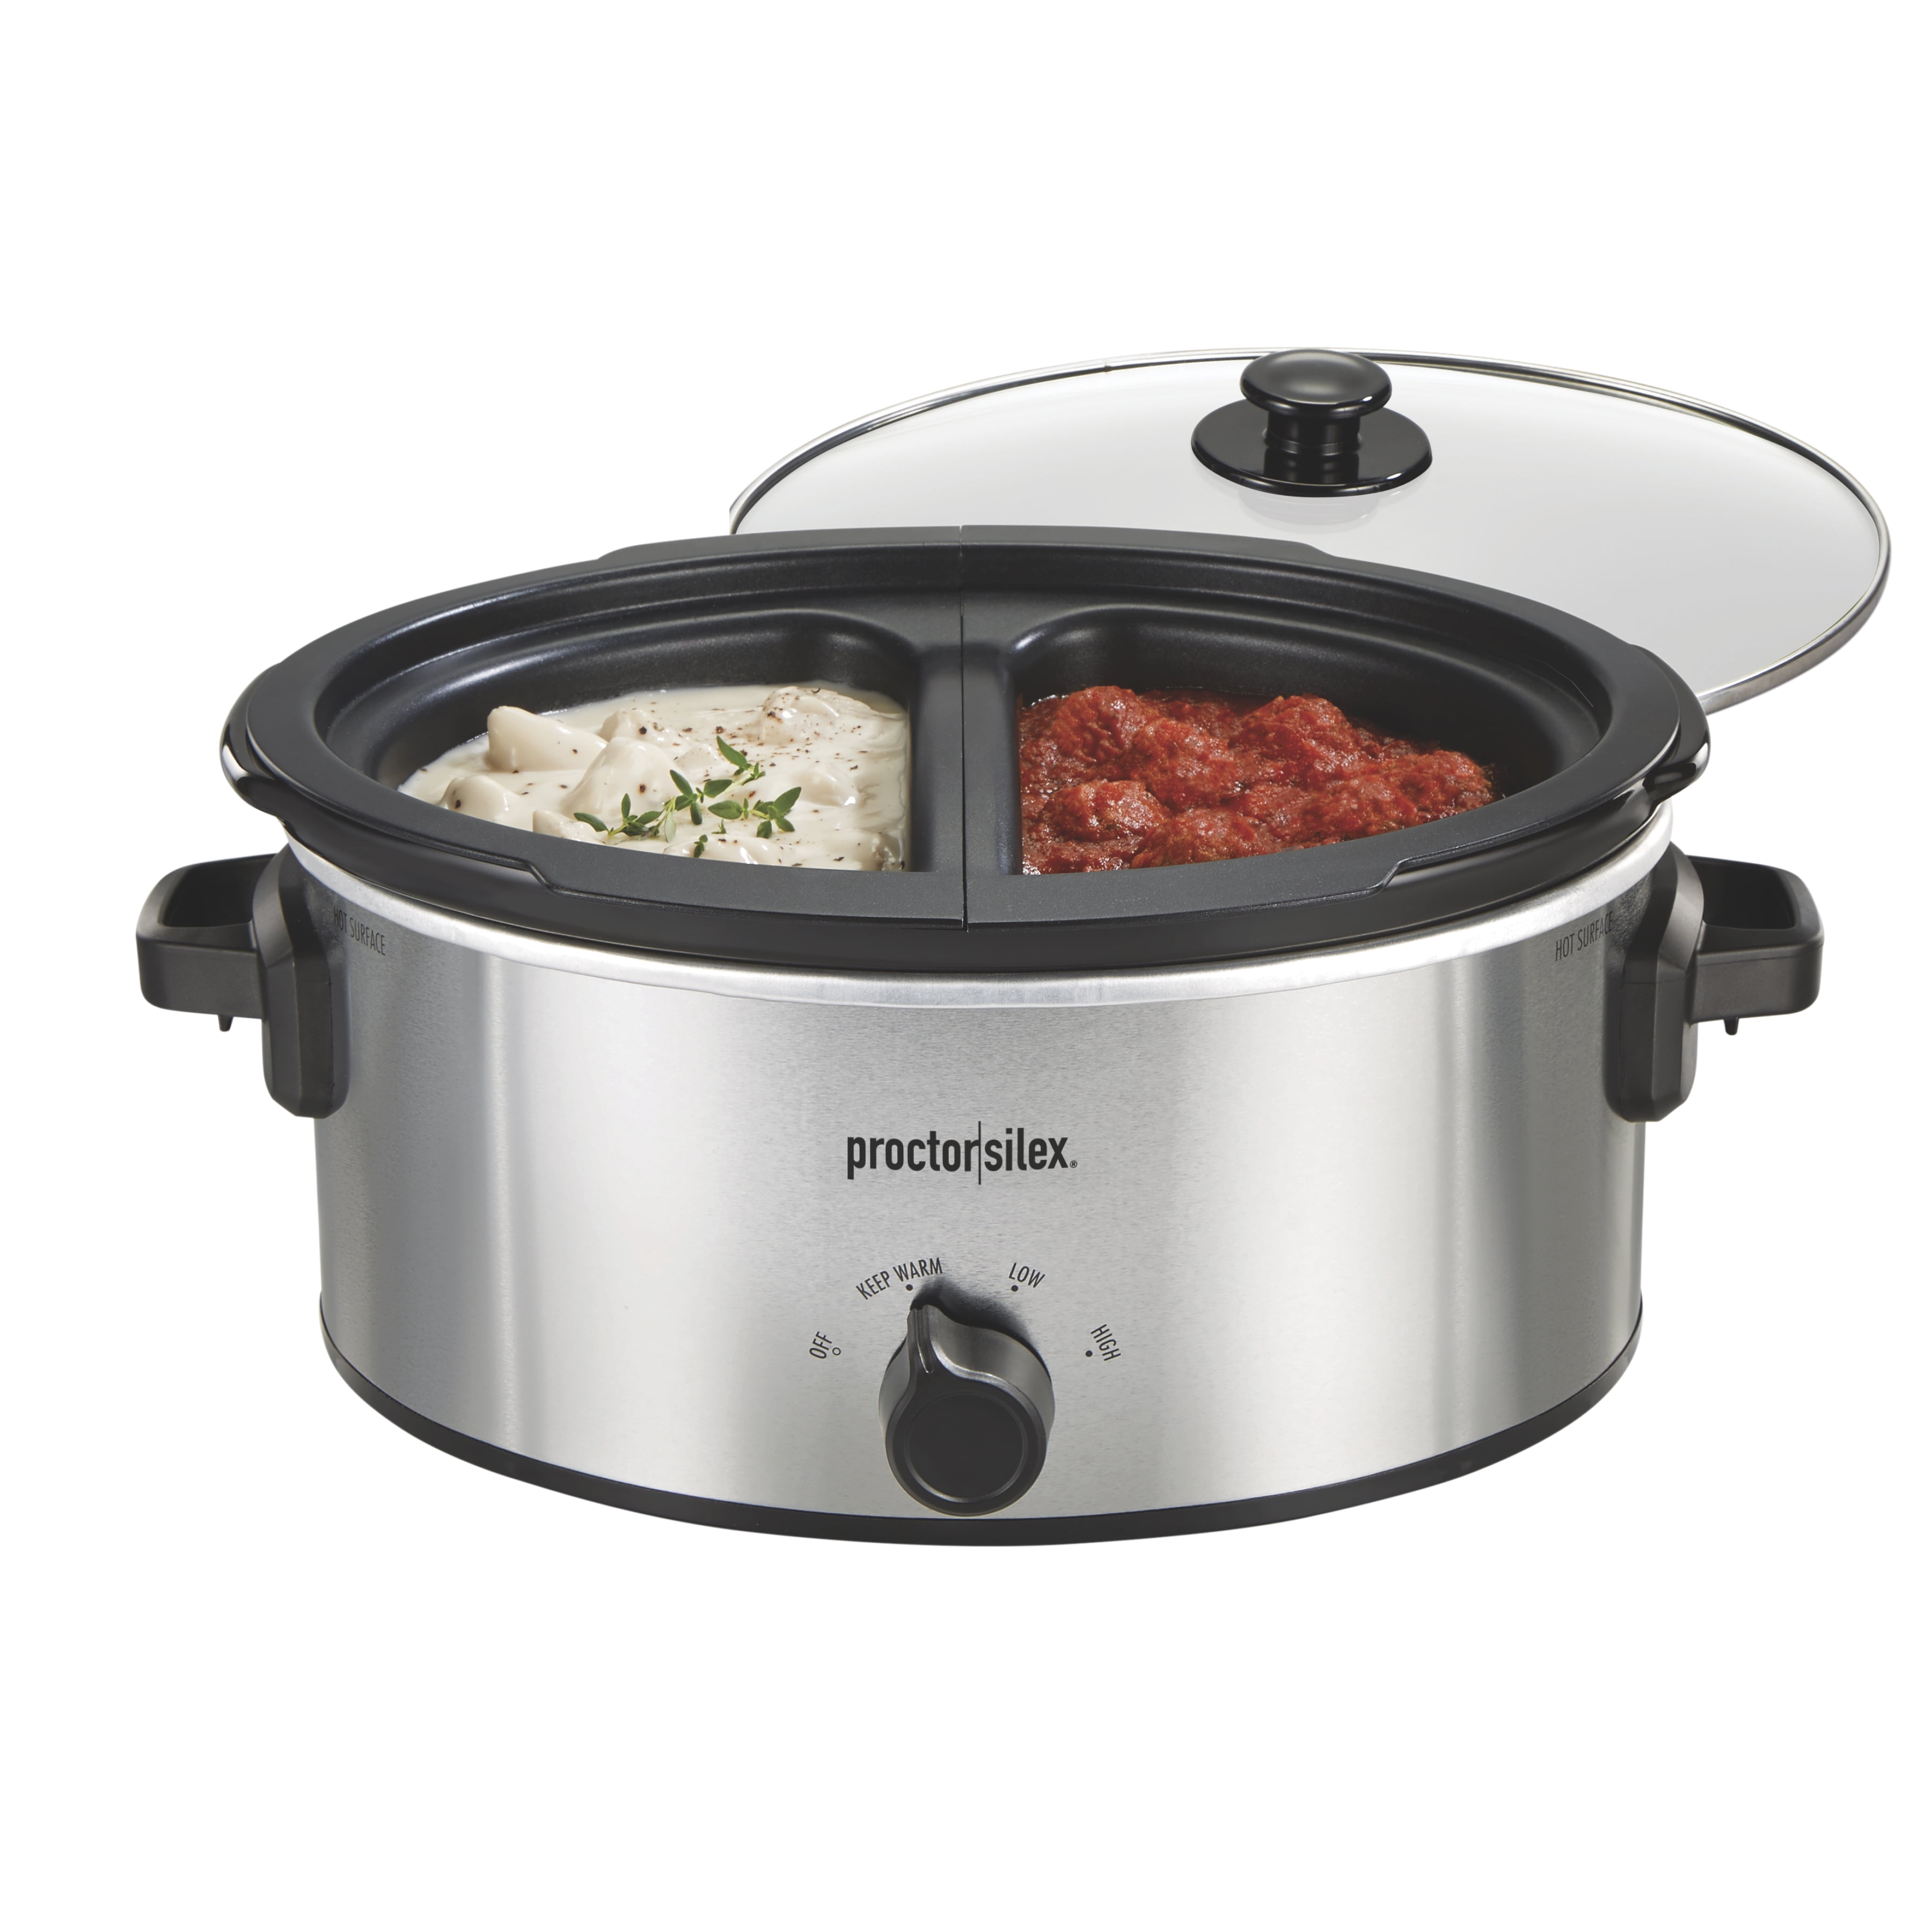 2.5 QT Silver Small Portable Twin Double Crockpot Slow Cooker For